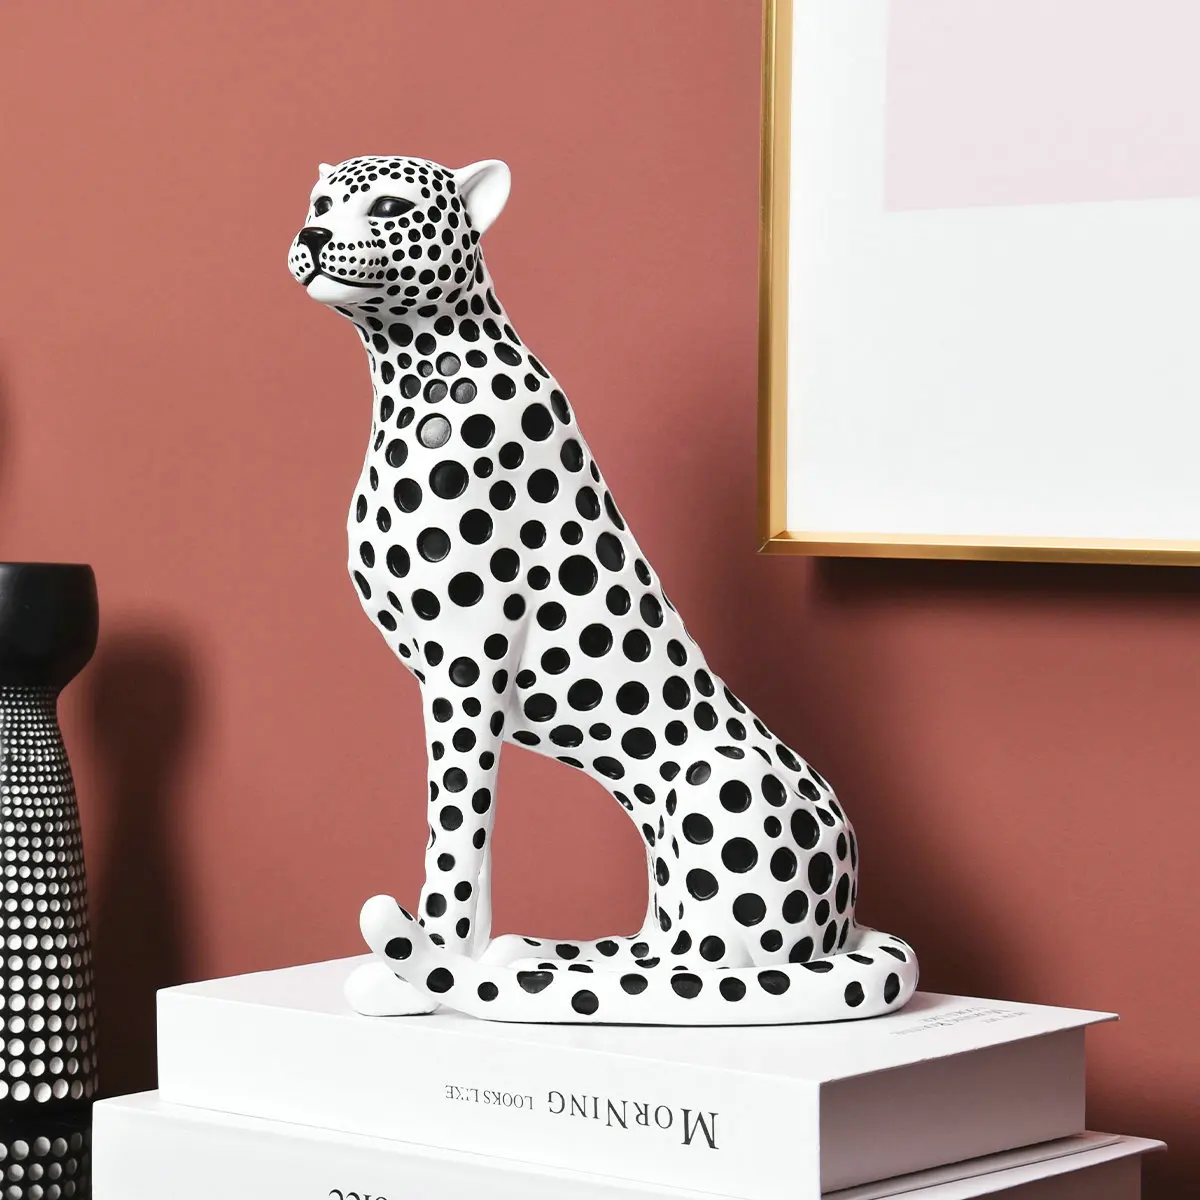 quoowiit modern spotted panther resin leopard